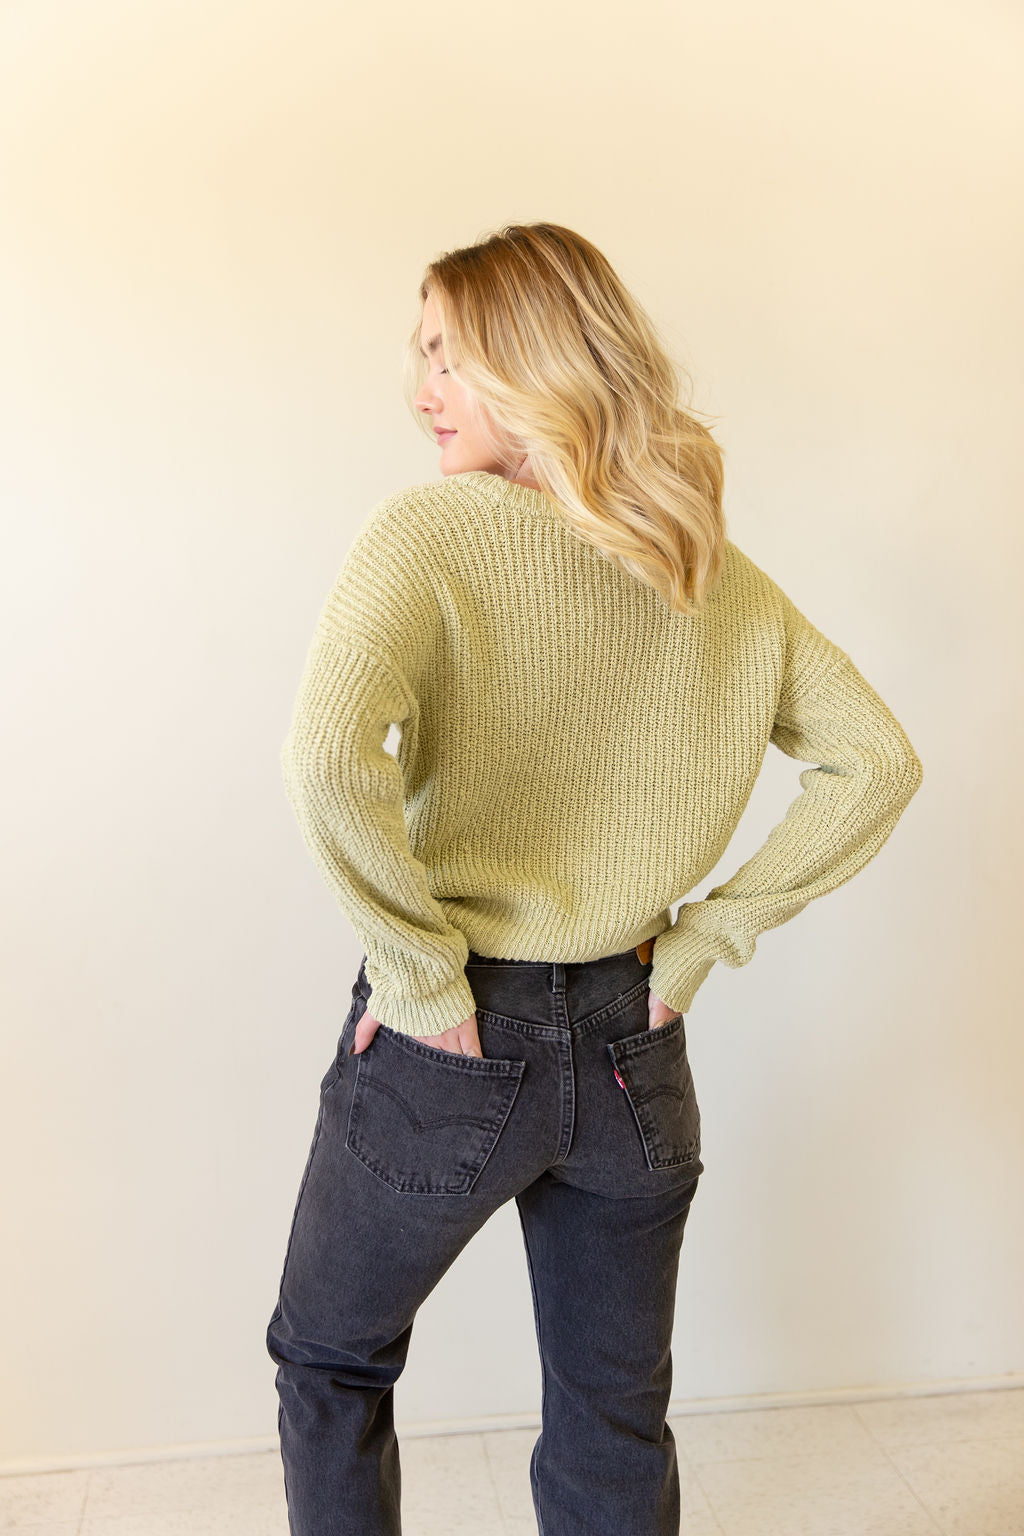 Never Leaving Knit Sweater by For Good